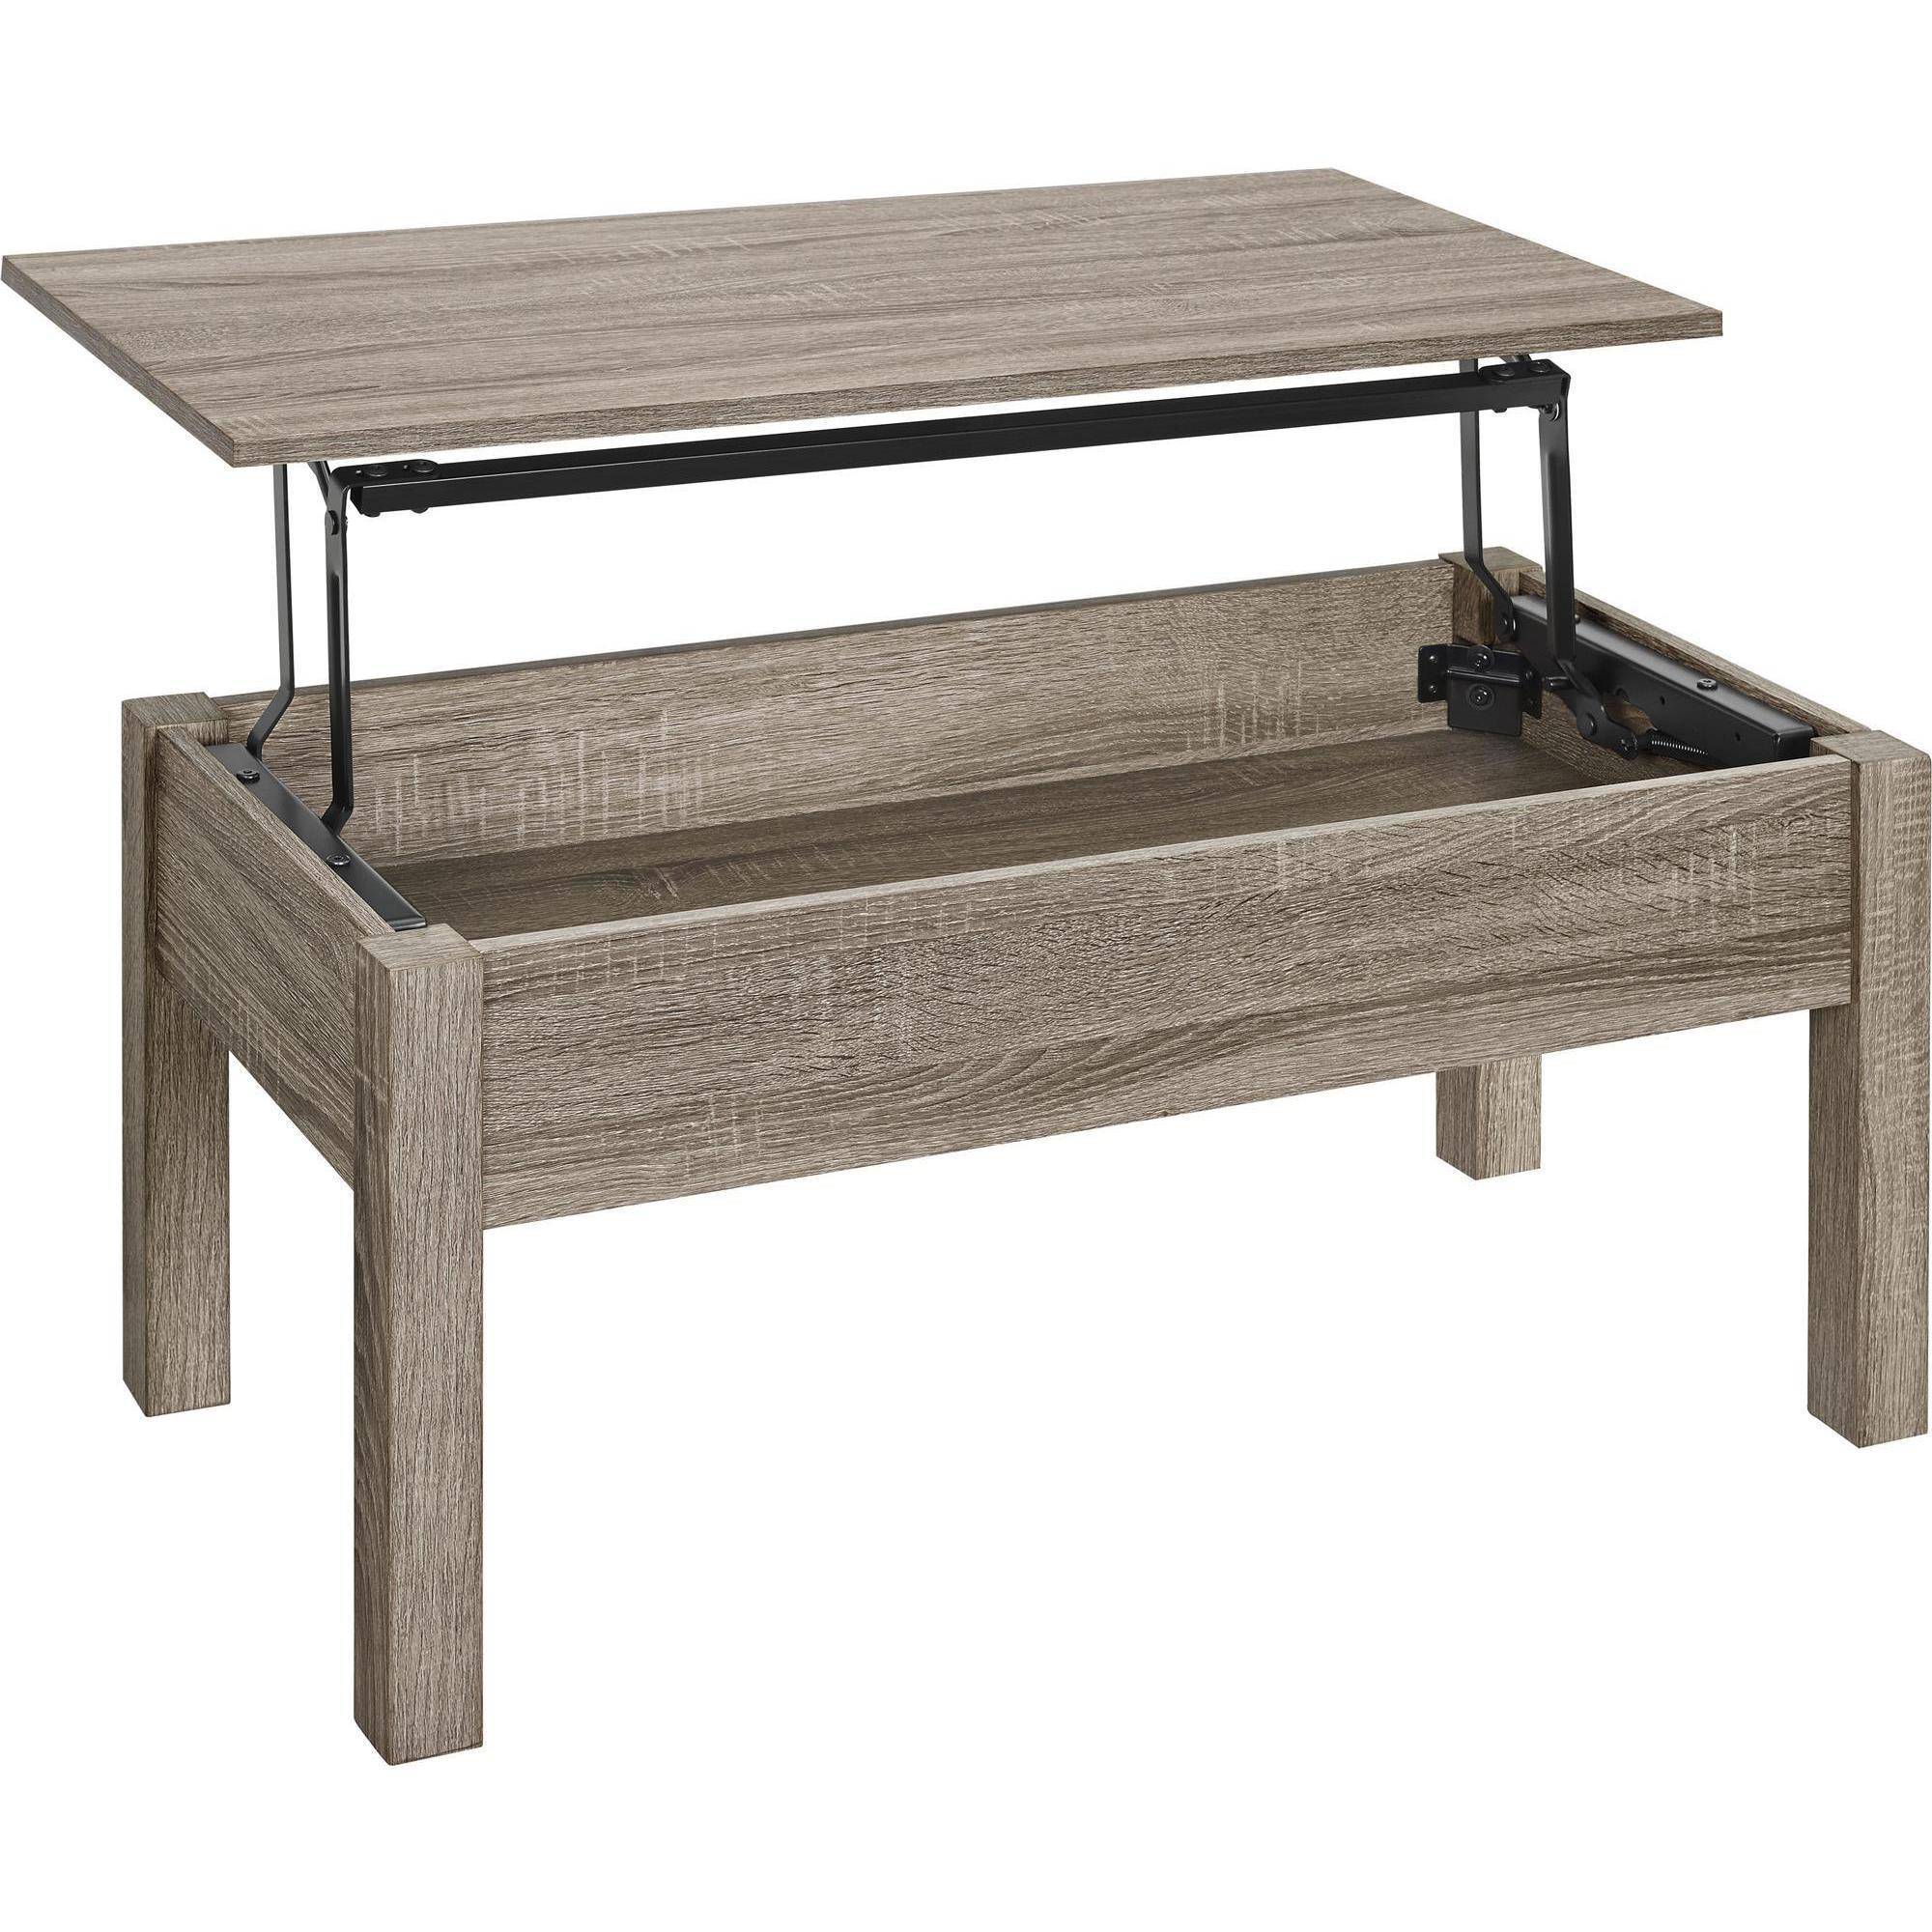 A small DIY transforming bench, as featured in Target's new "Threshold" furniture collection. 